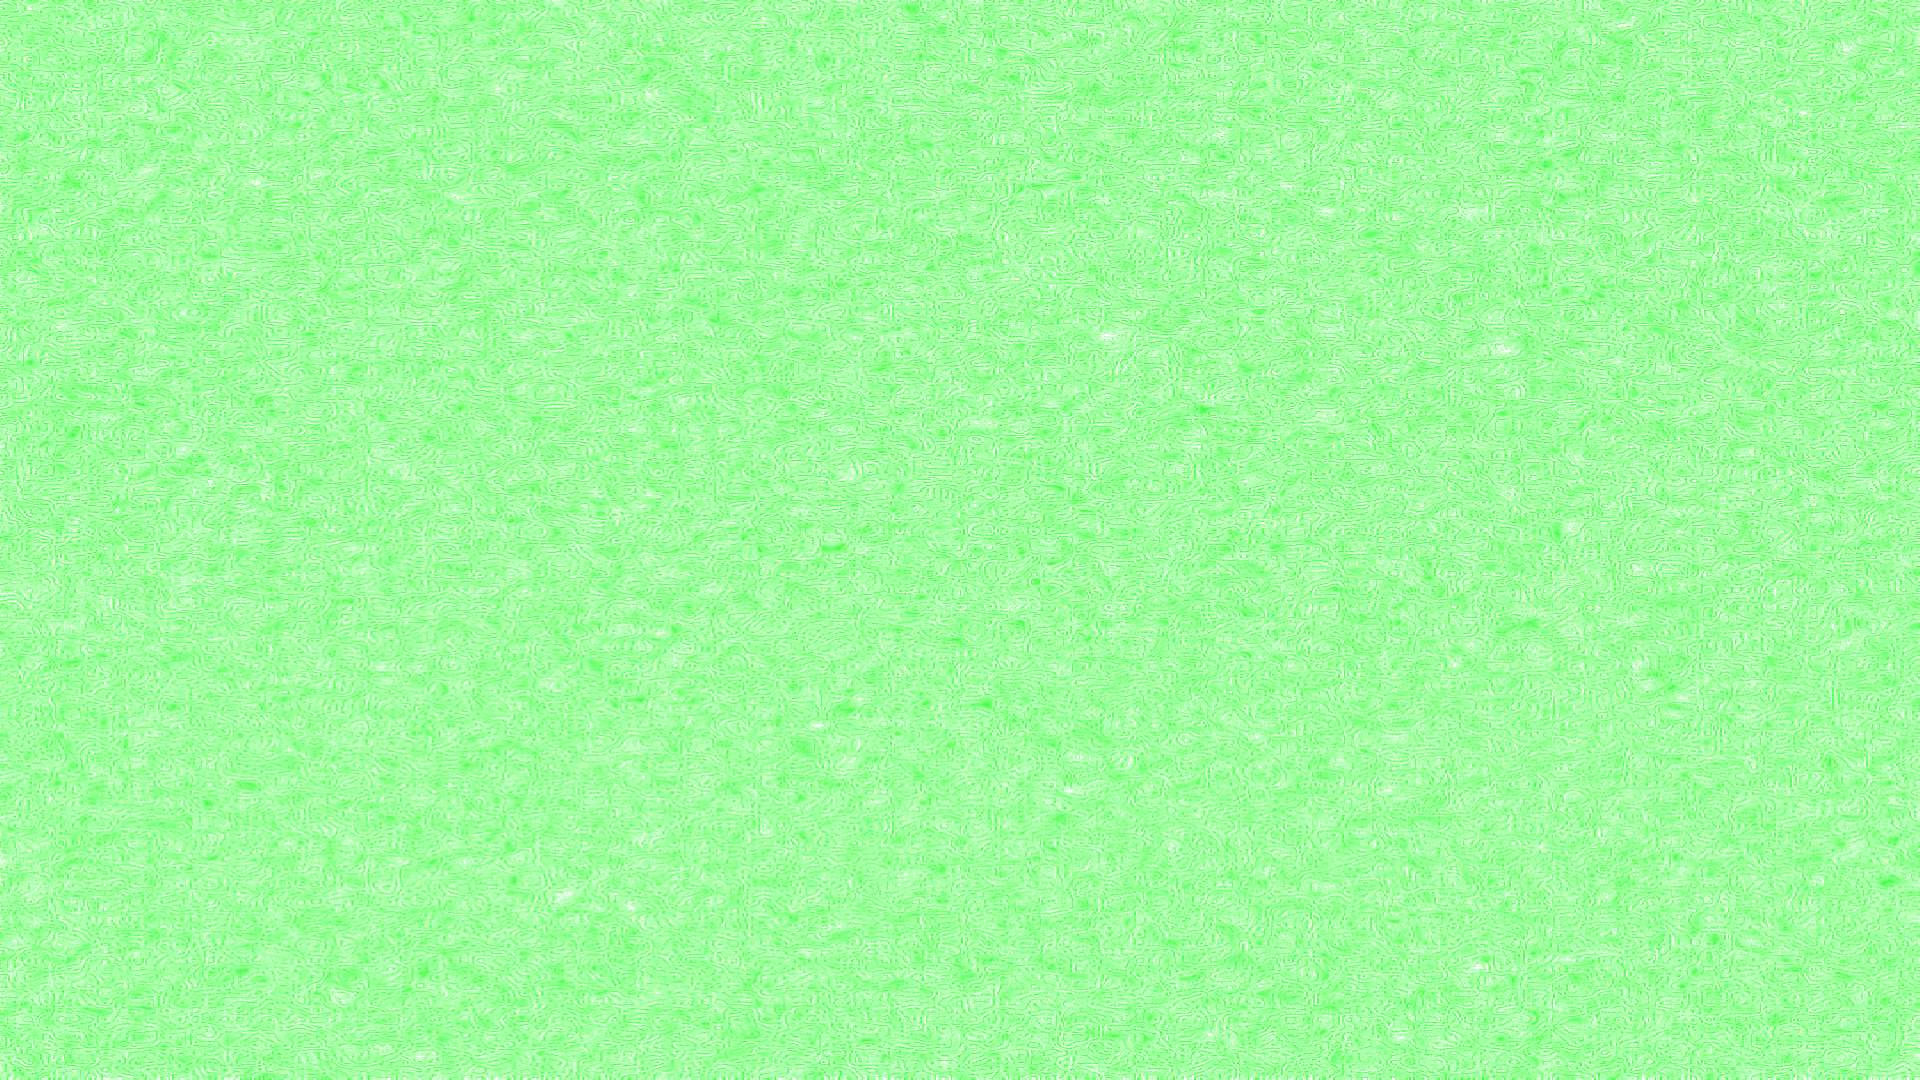 Simple Green Background Image